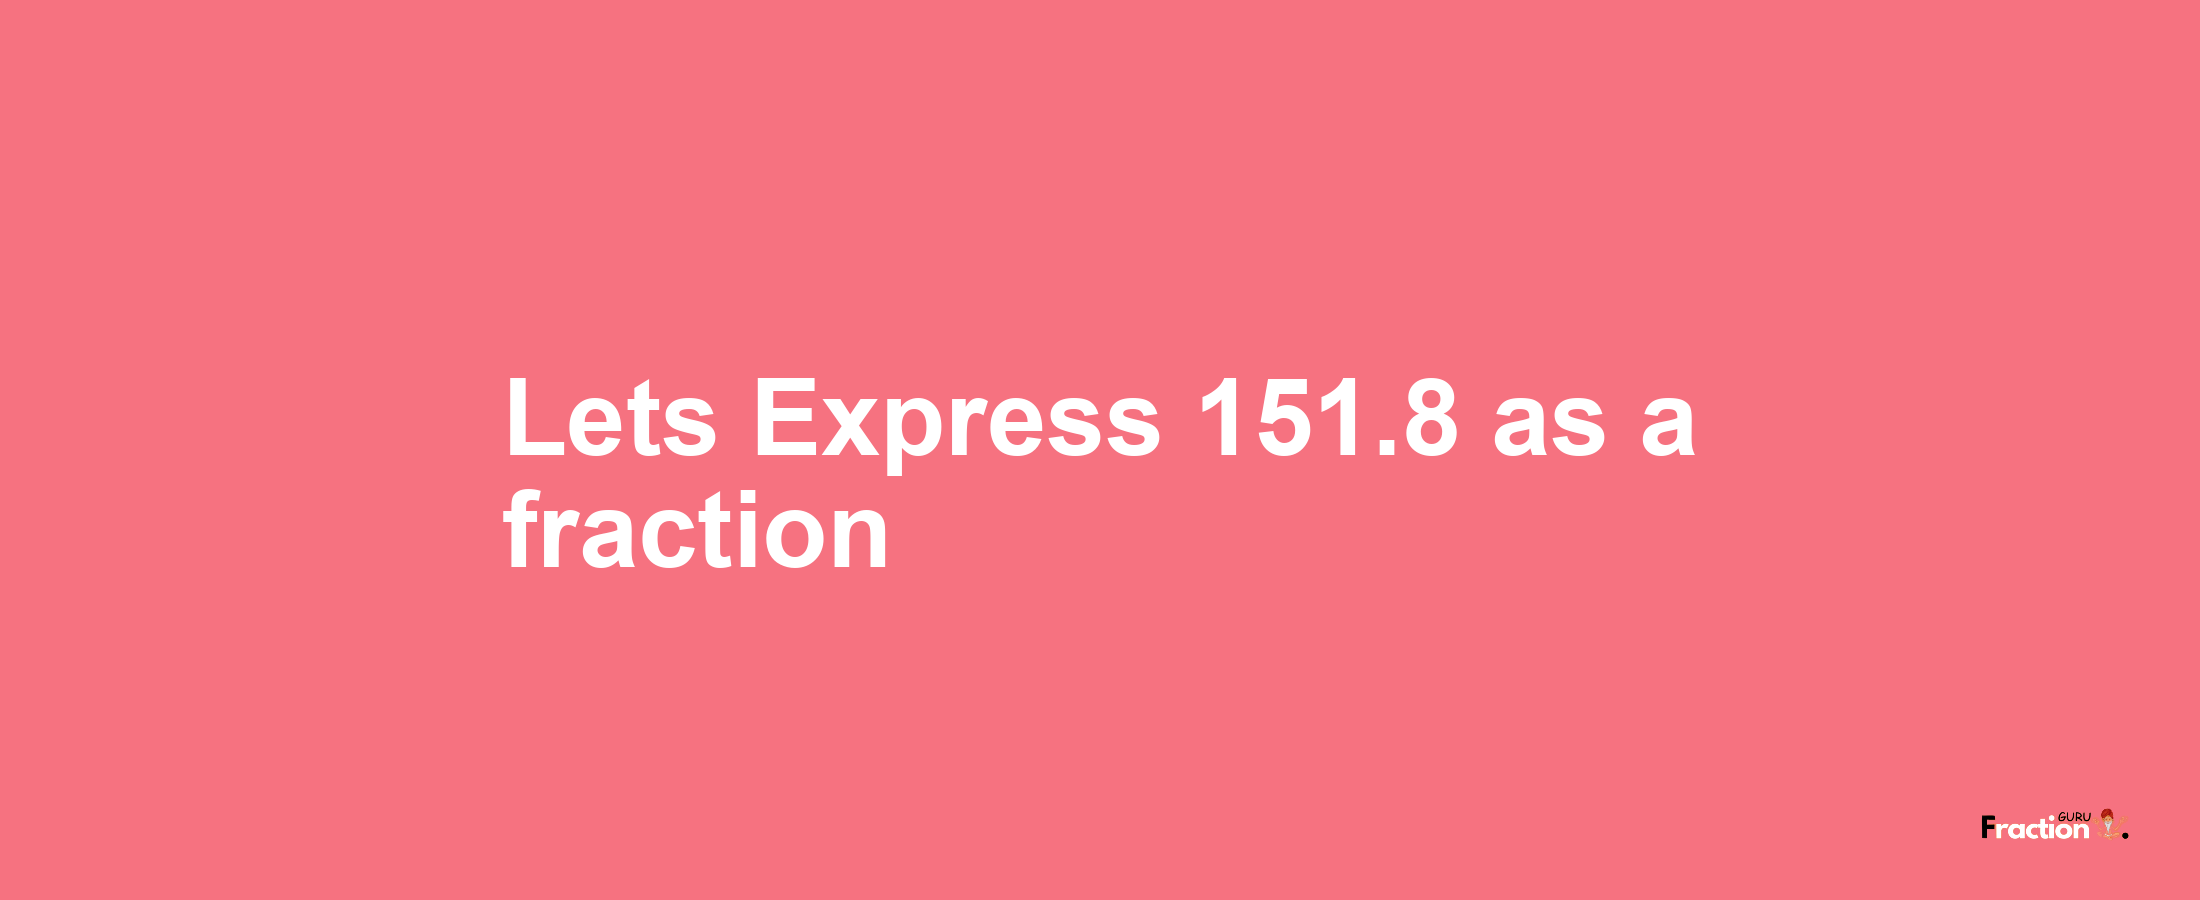 Lets Express 151.8 as afraction